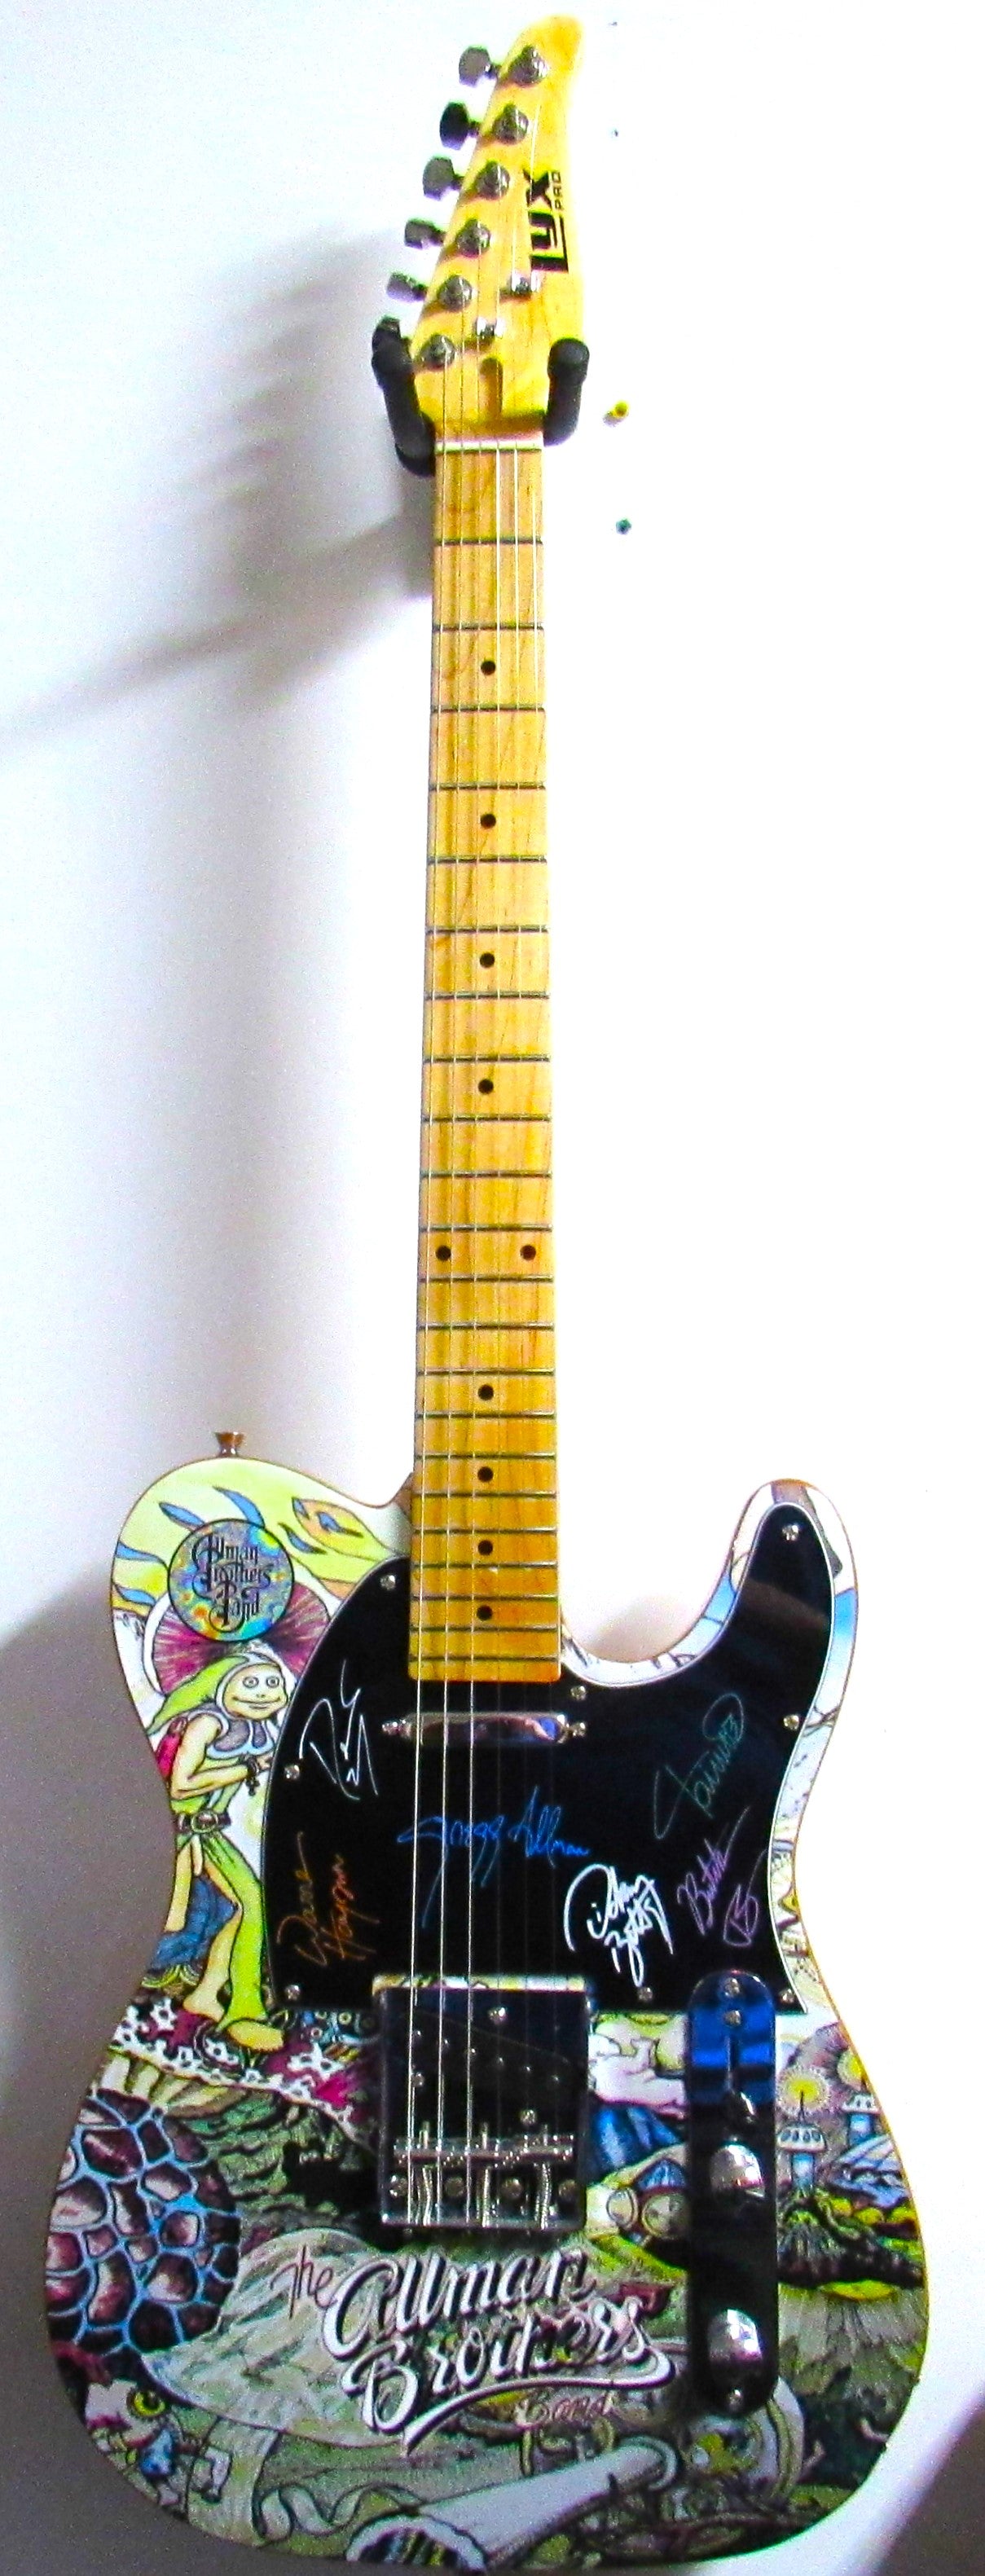 Allman Brothers Band Autographed Guitar - Zion Graphic Collectibles